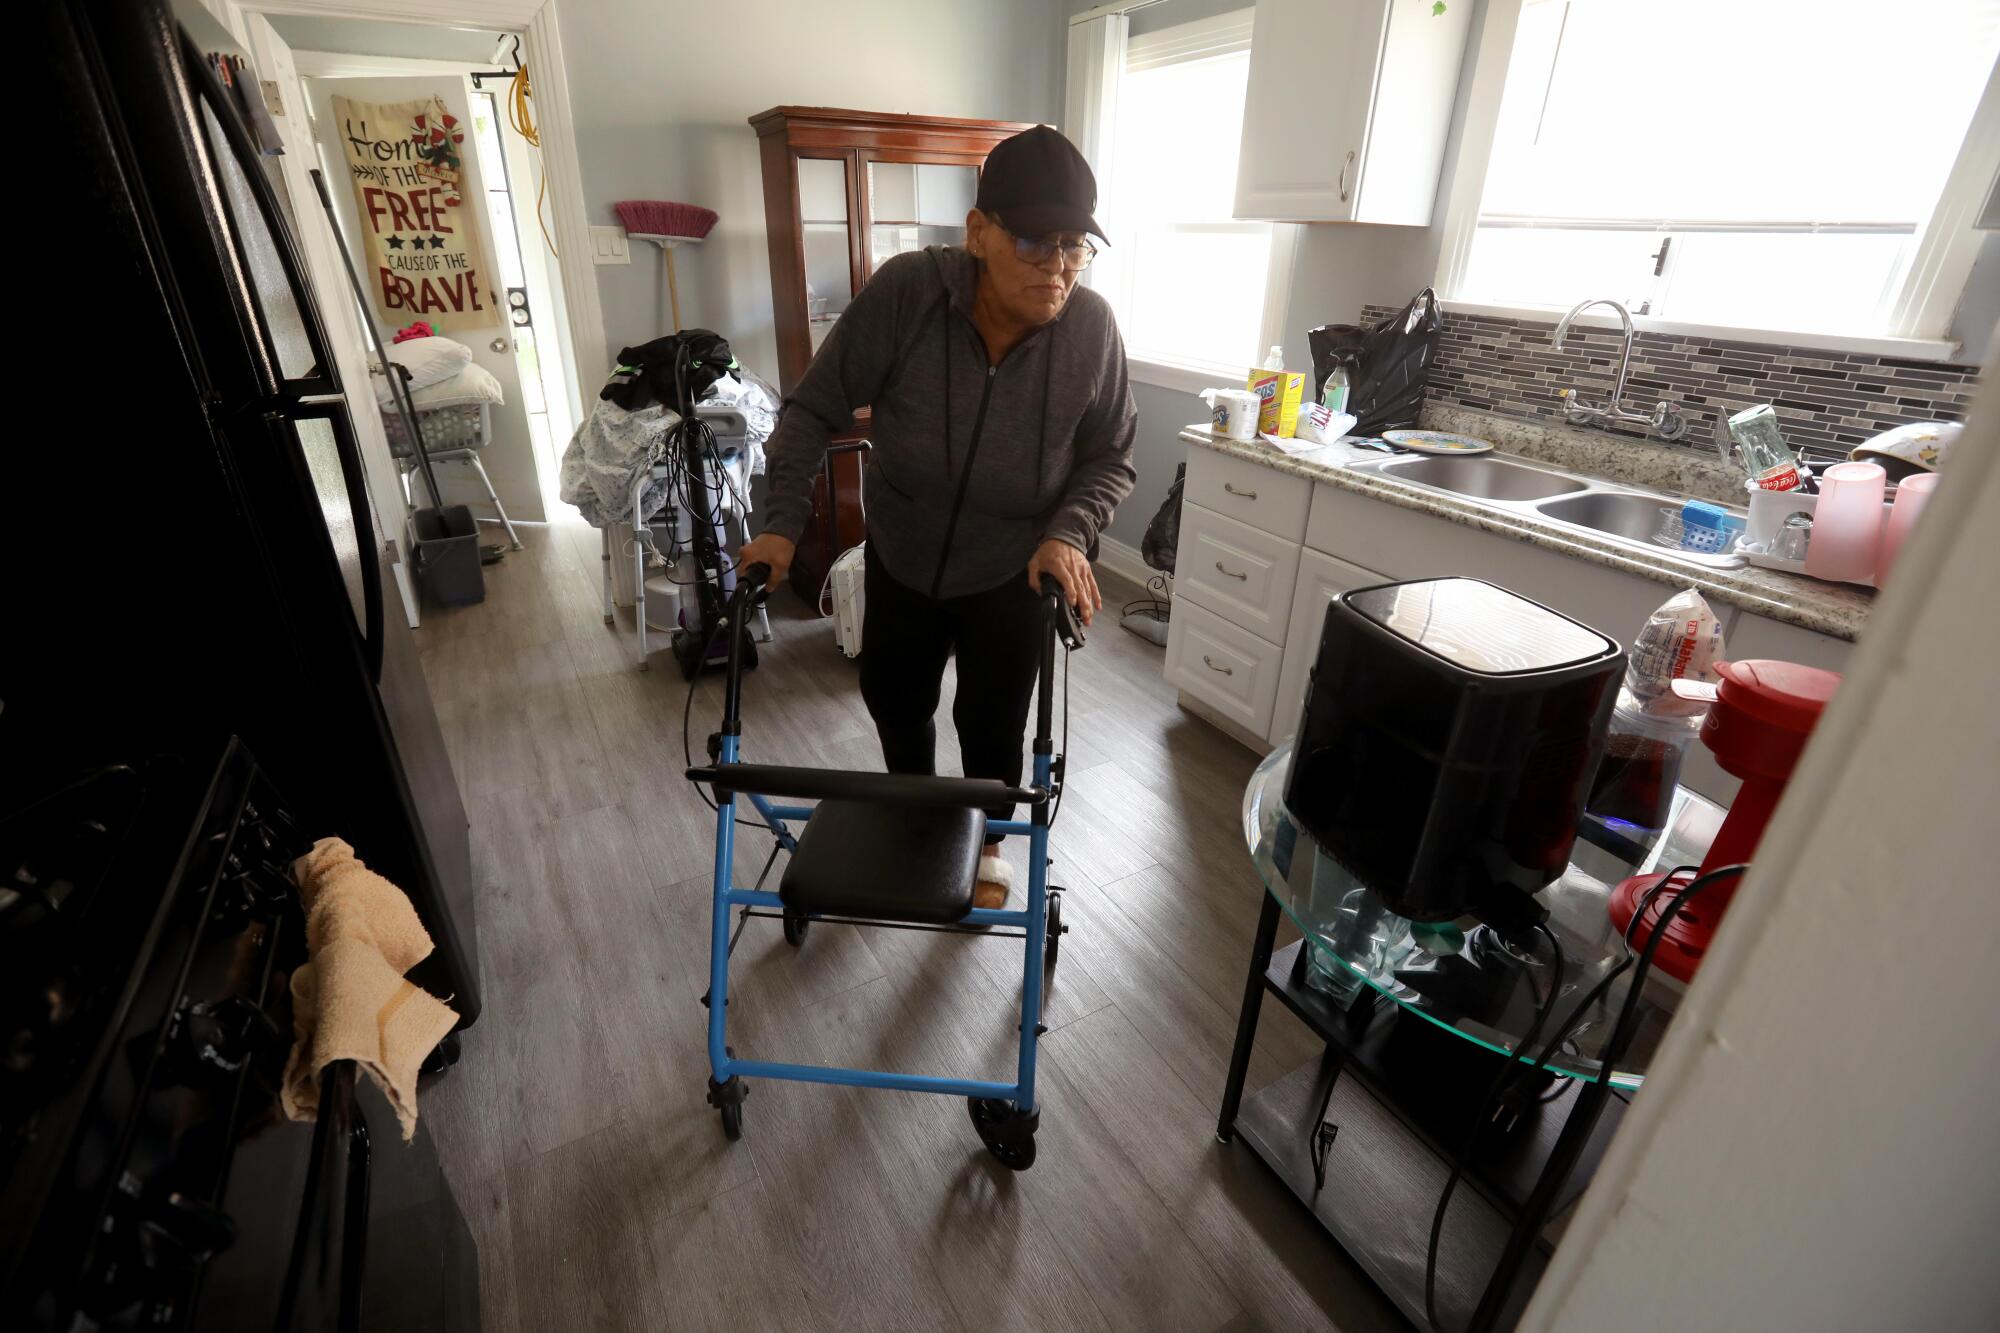 A woman uses a walker to make her way through the kitchen in her home.